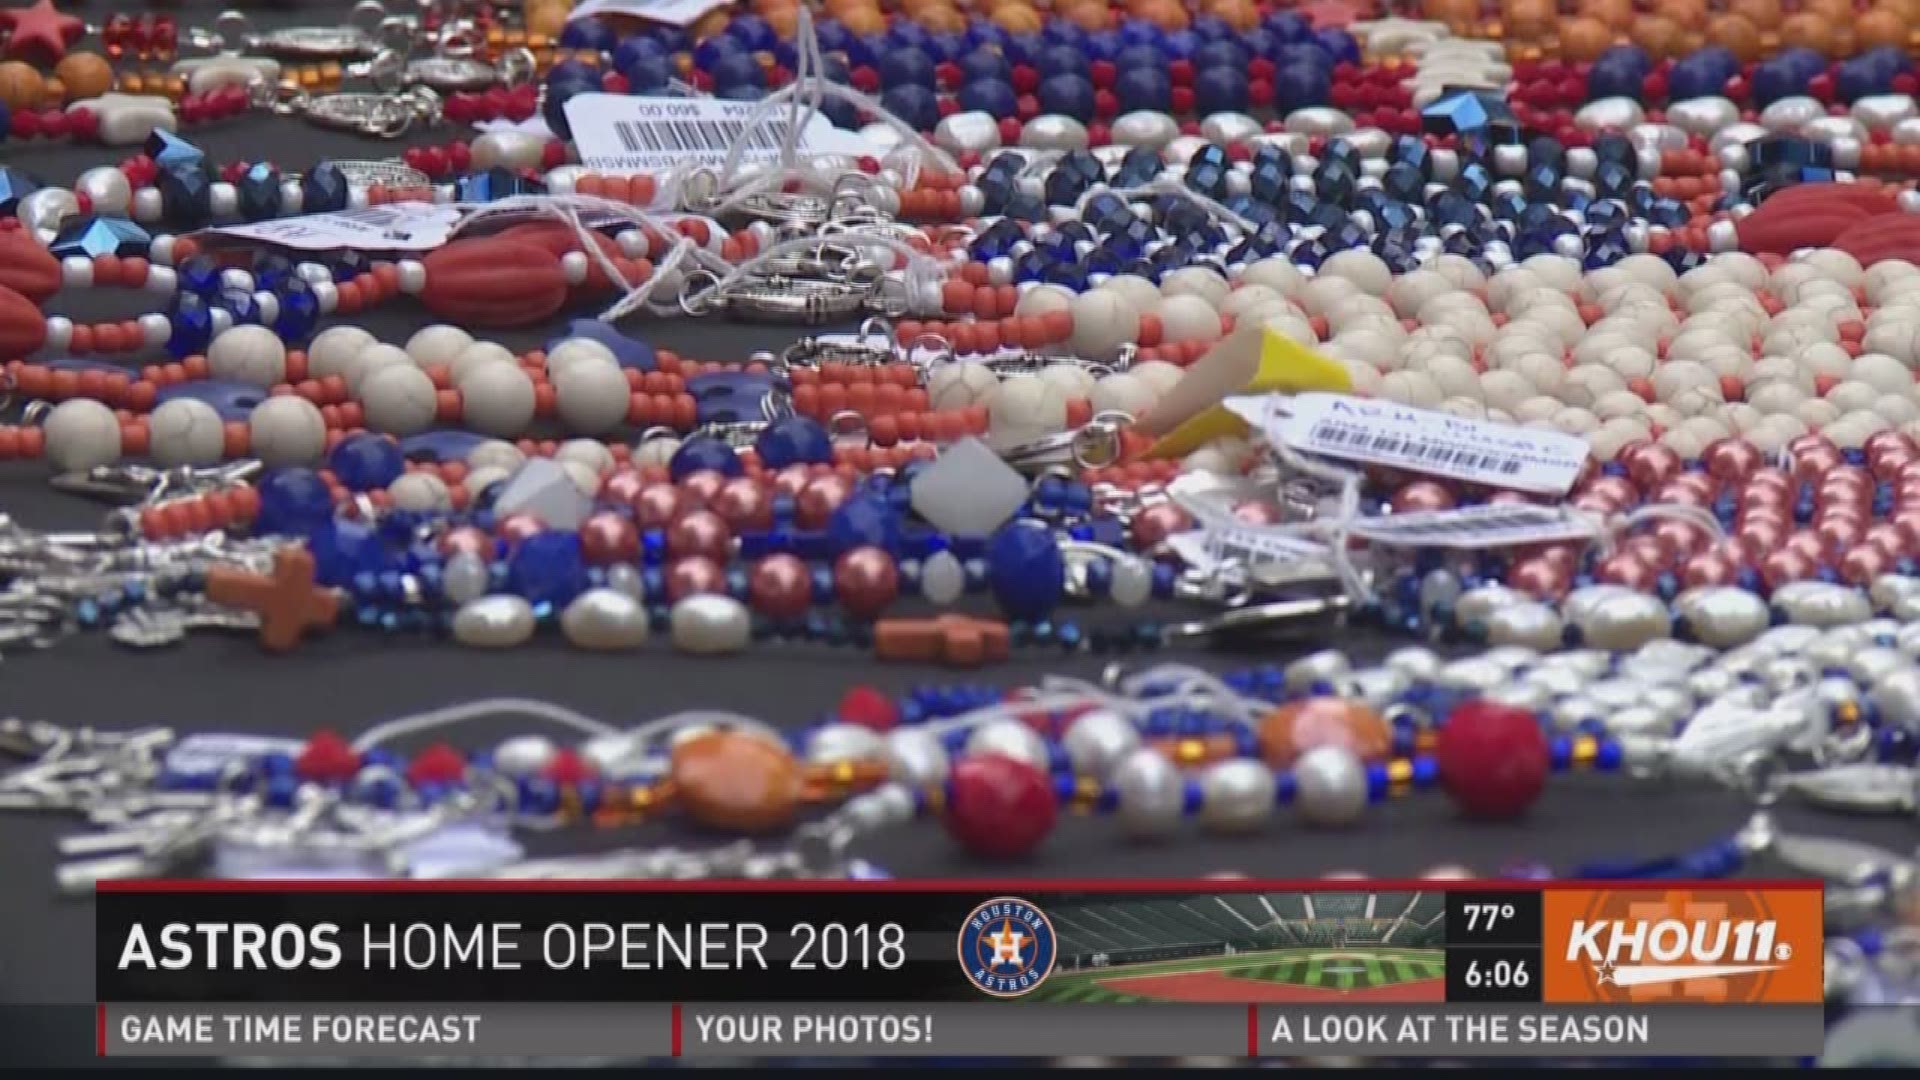 Annunciation Catholic Church sells unique, handmade rosary beads to Astros fans who want to pray over for the team. All proceeds will go to fixing up the church. 